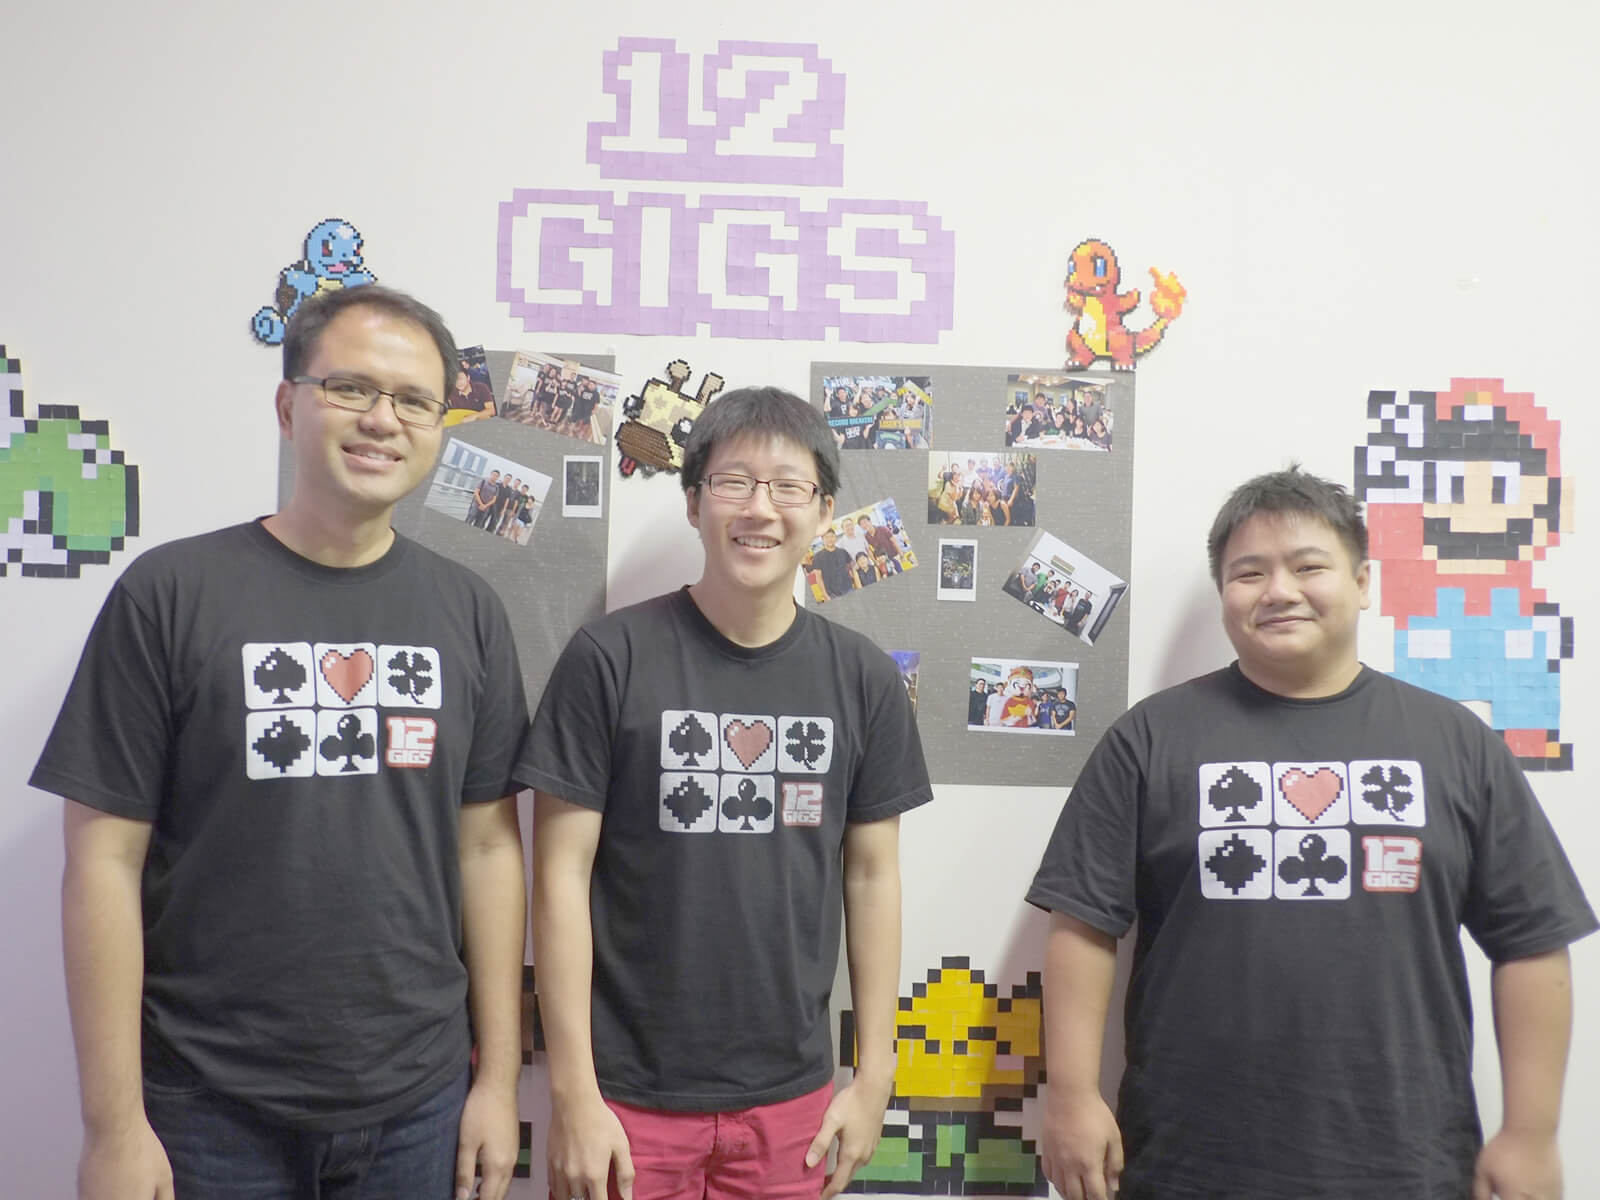 Three DigiPen graduates stand in front of a wall decorated with pixel art and the 12 Gigs logo wearing black t-shirts